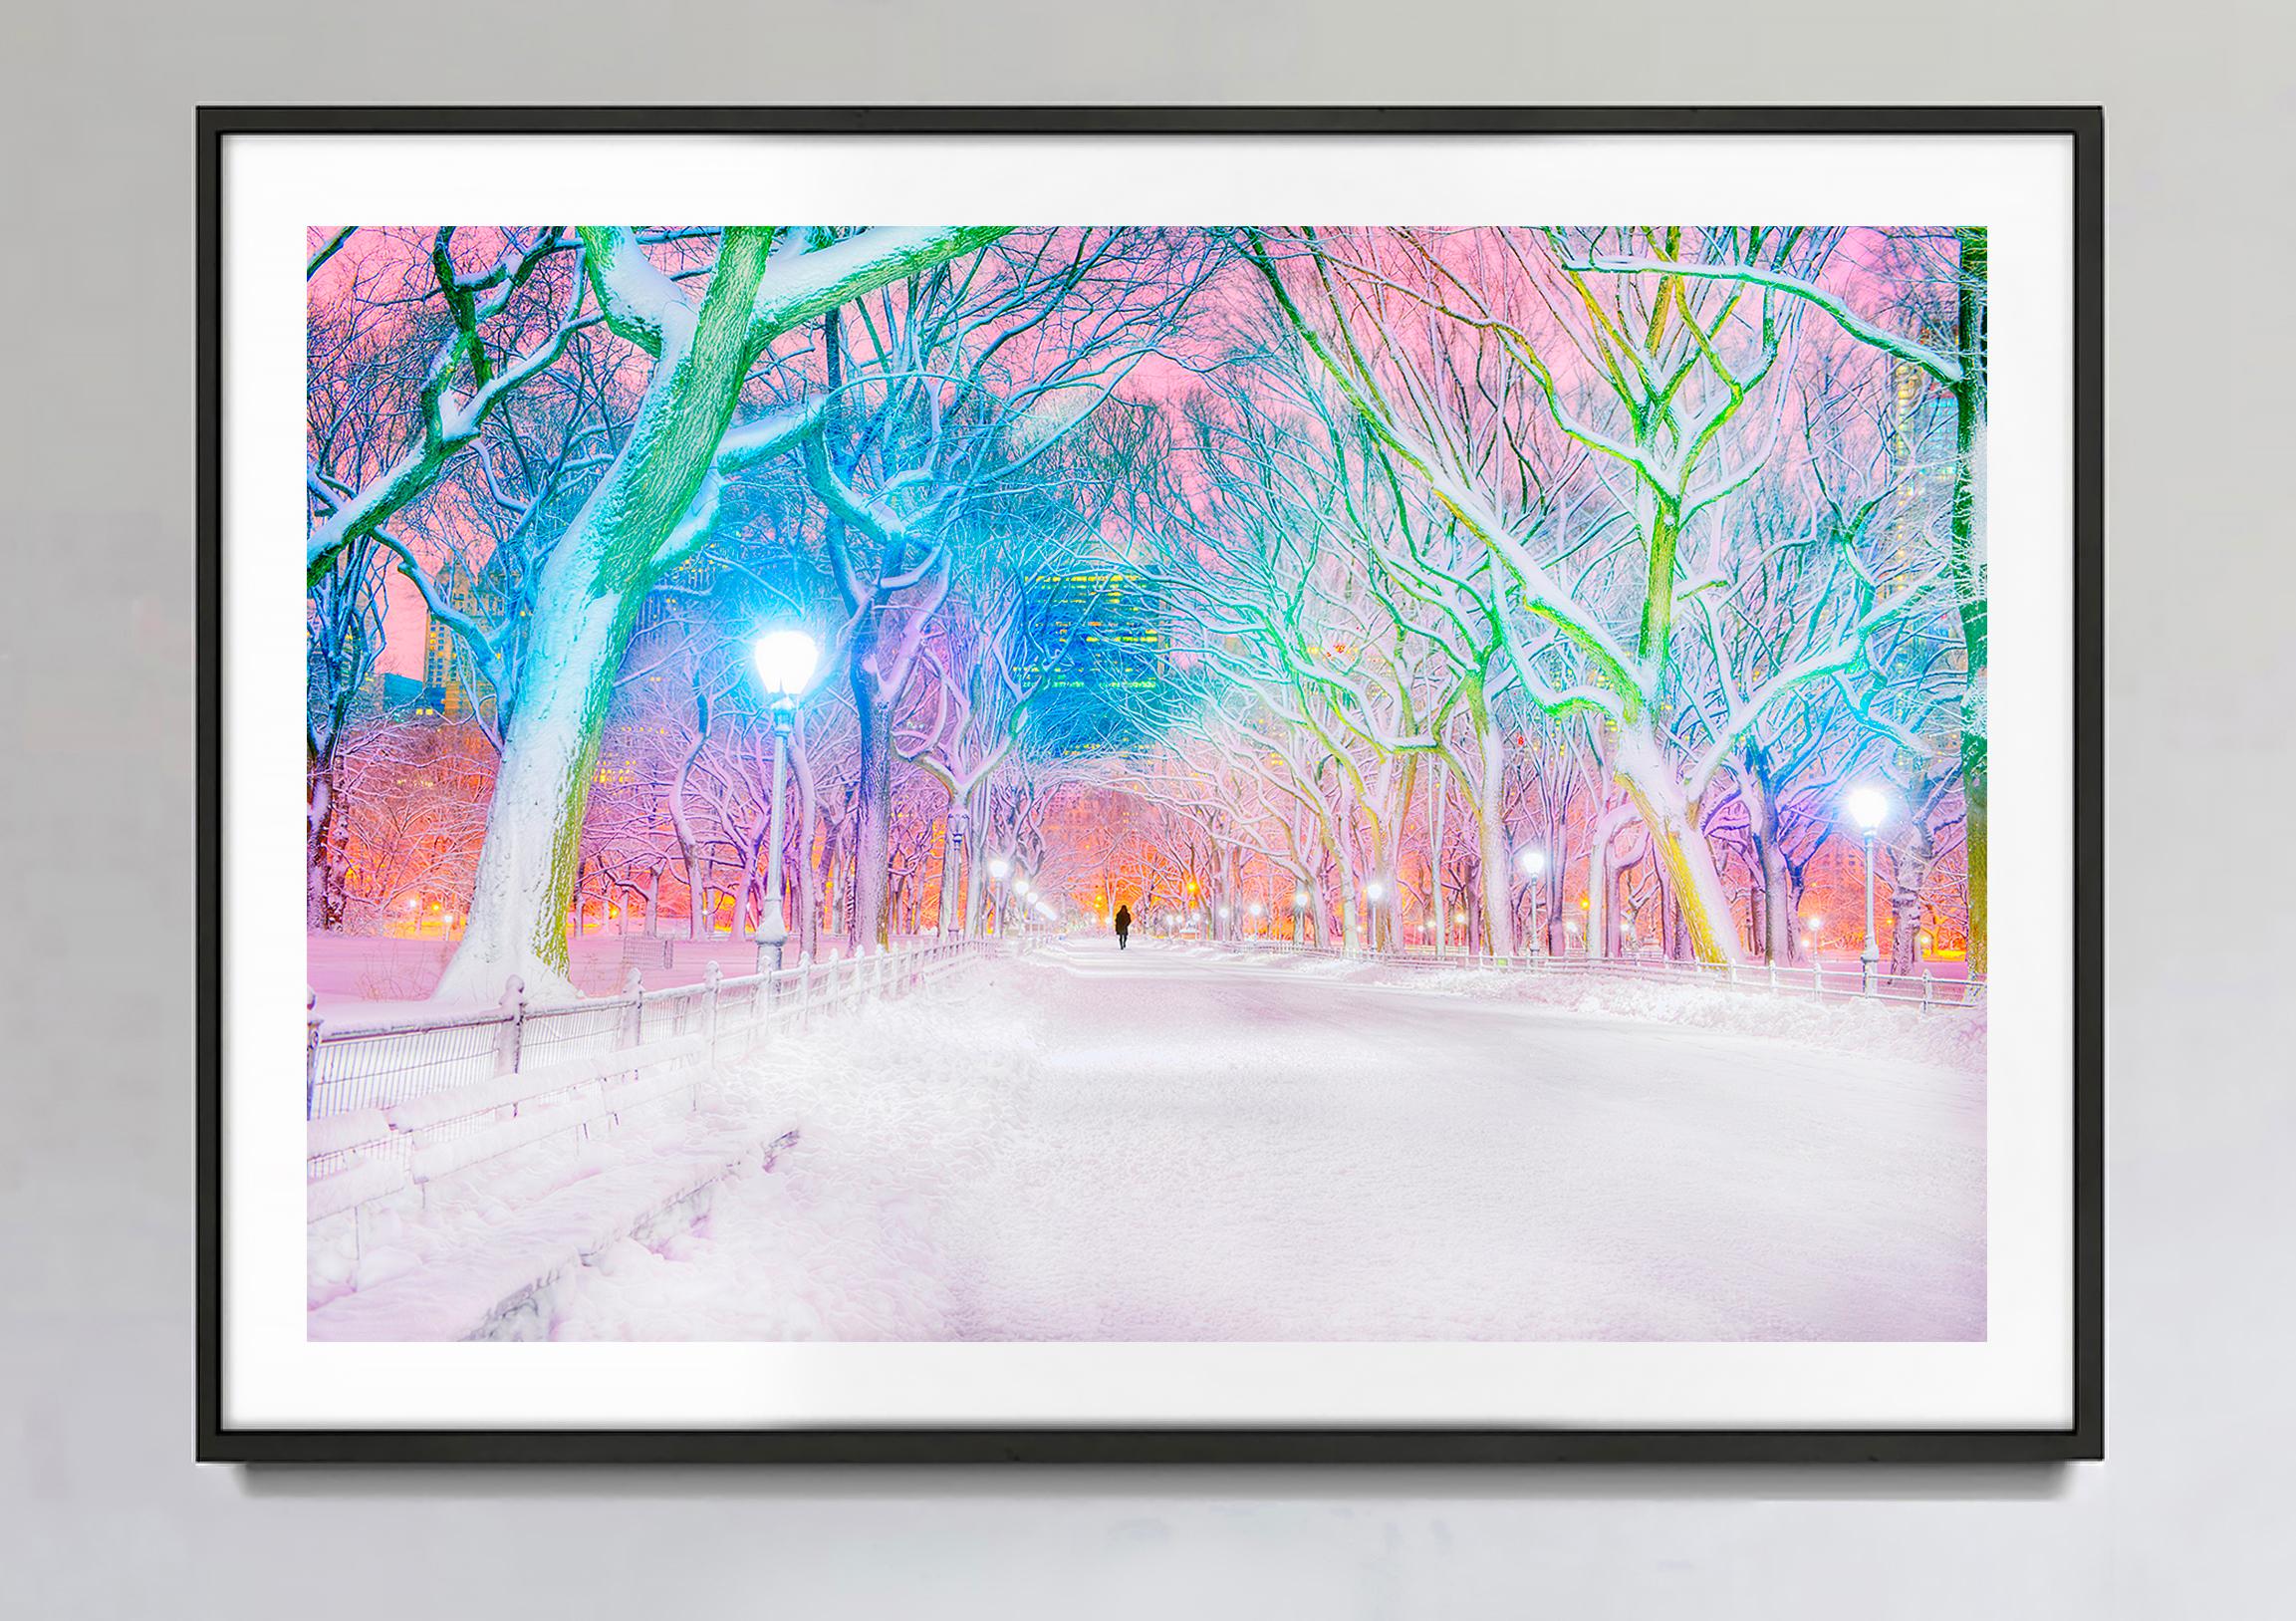 Central Park Pink Dawn In Snowstorm, New York City - Photograph by Mitchell Funk